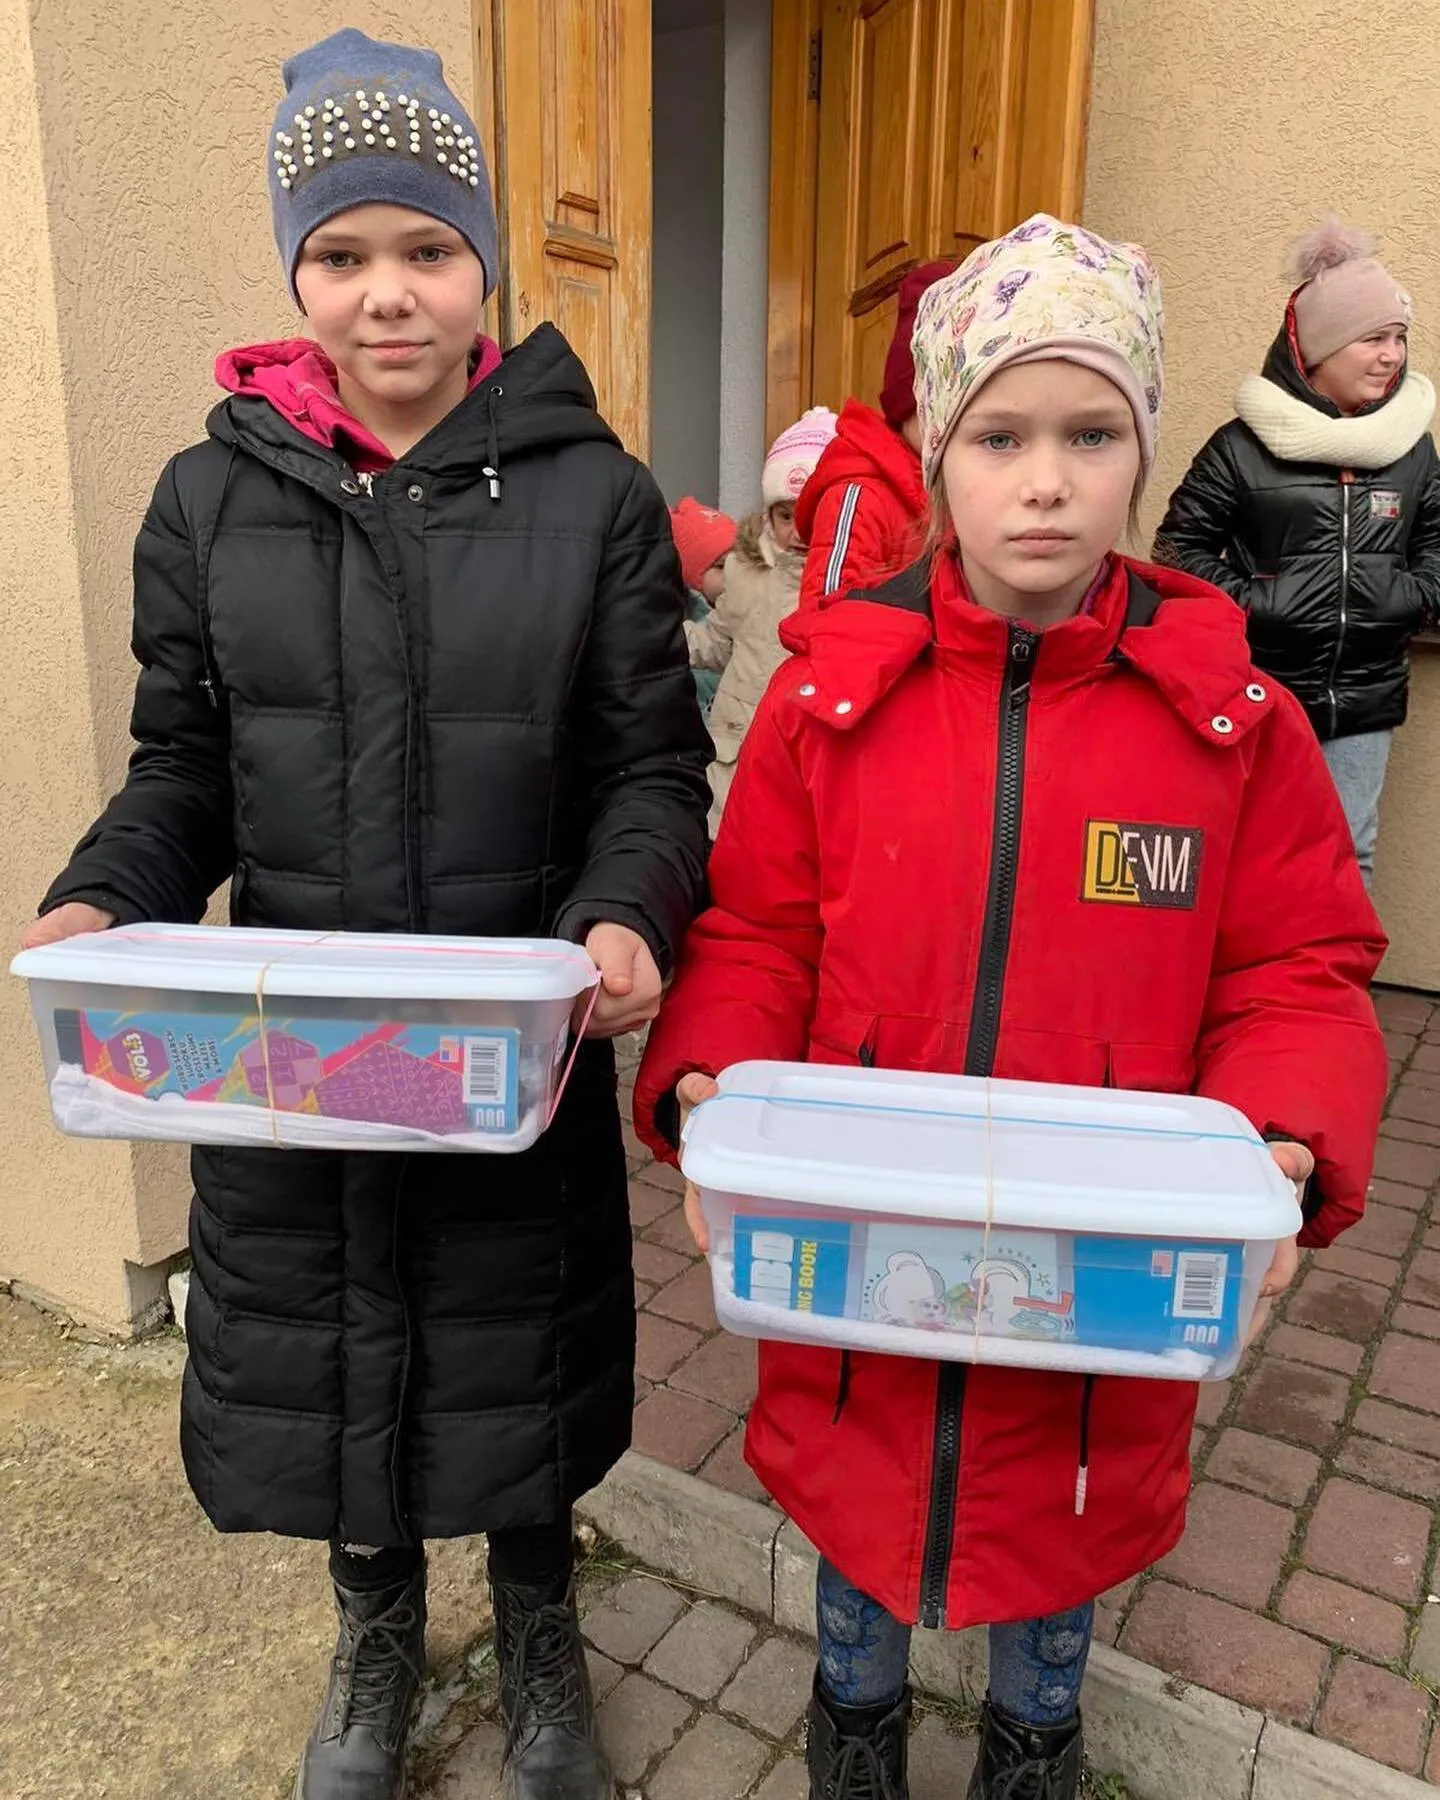 two children holding plastic containers in front of a building.